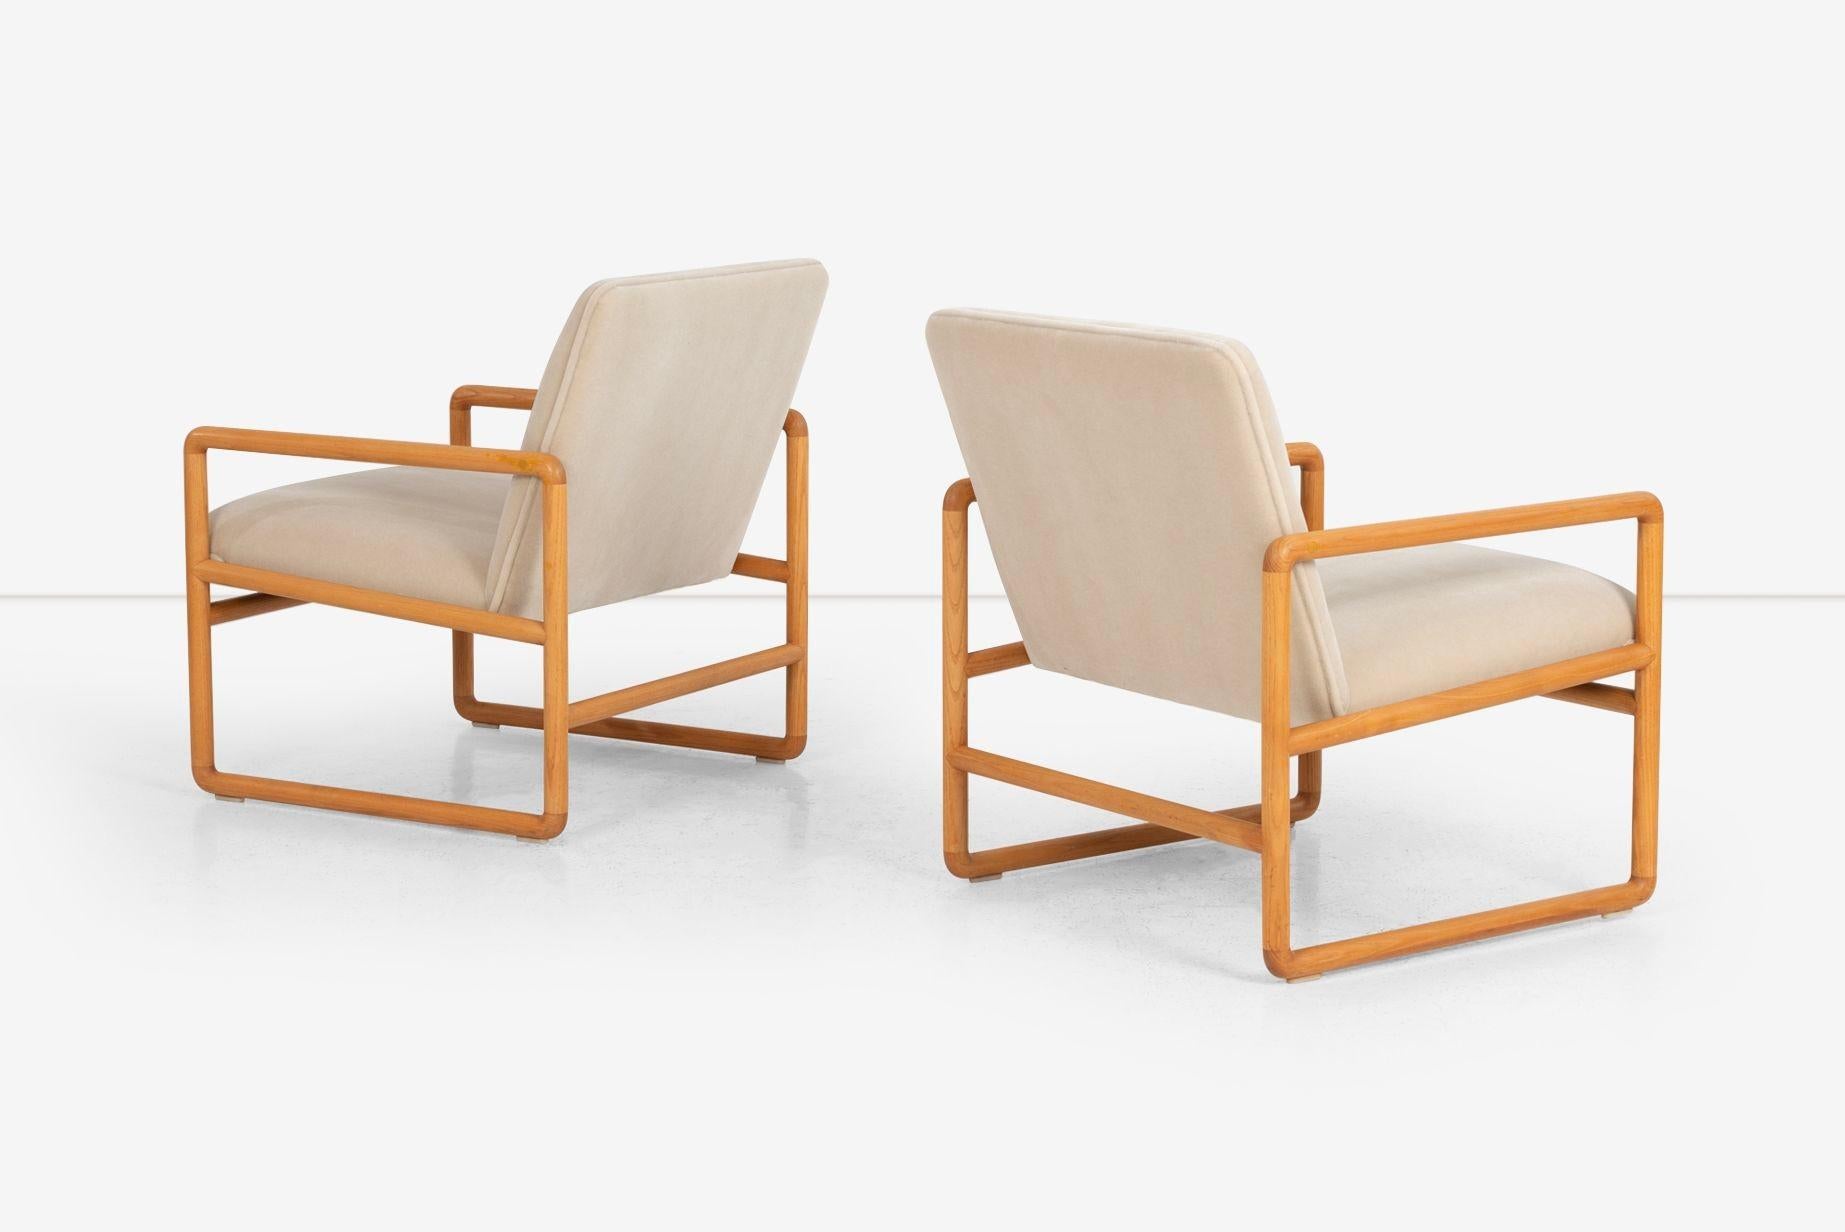 Mid-20th Century Ward Bennett Lounge Chairs in Solid Oak for Brickel Associates 1965c. For Sale